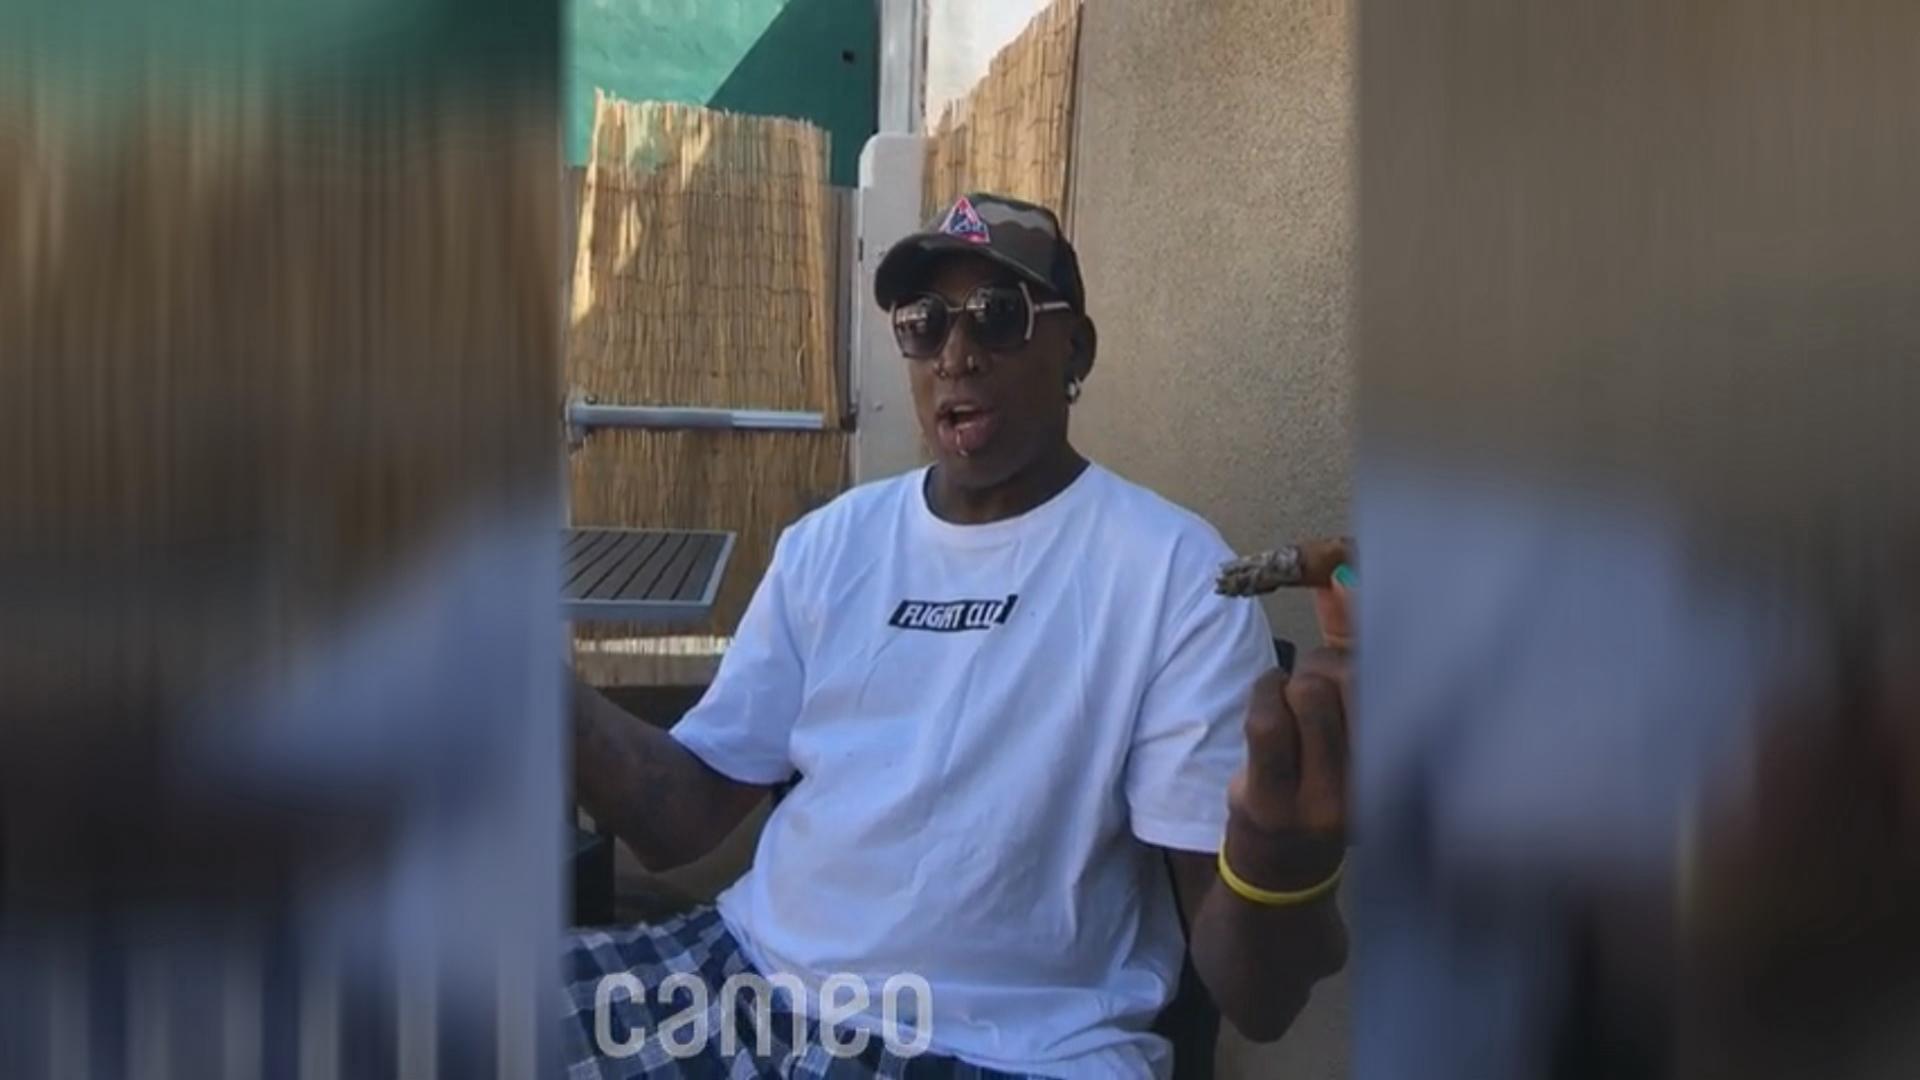 Fans can a buy a shout-out from Dennis Rodman for ,000 on Cameo.